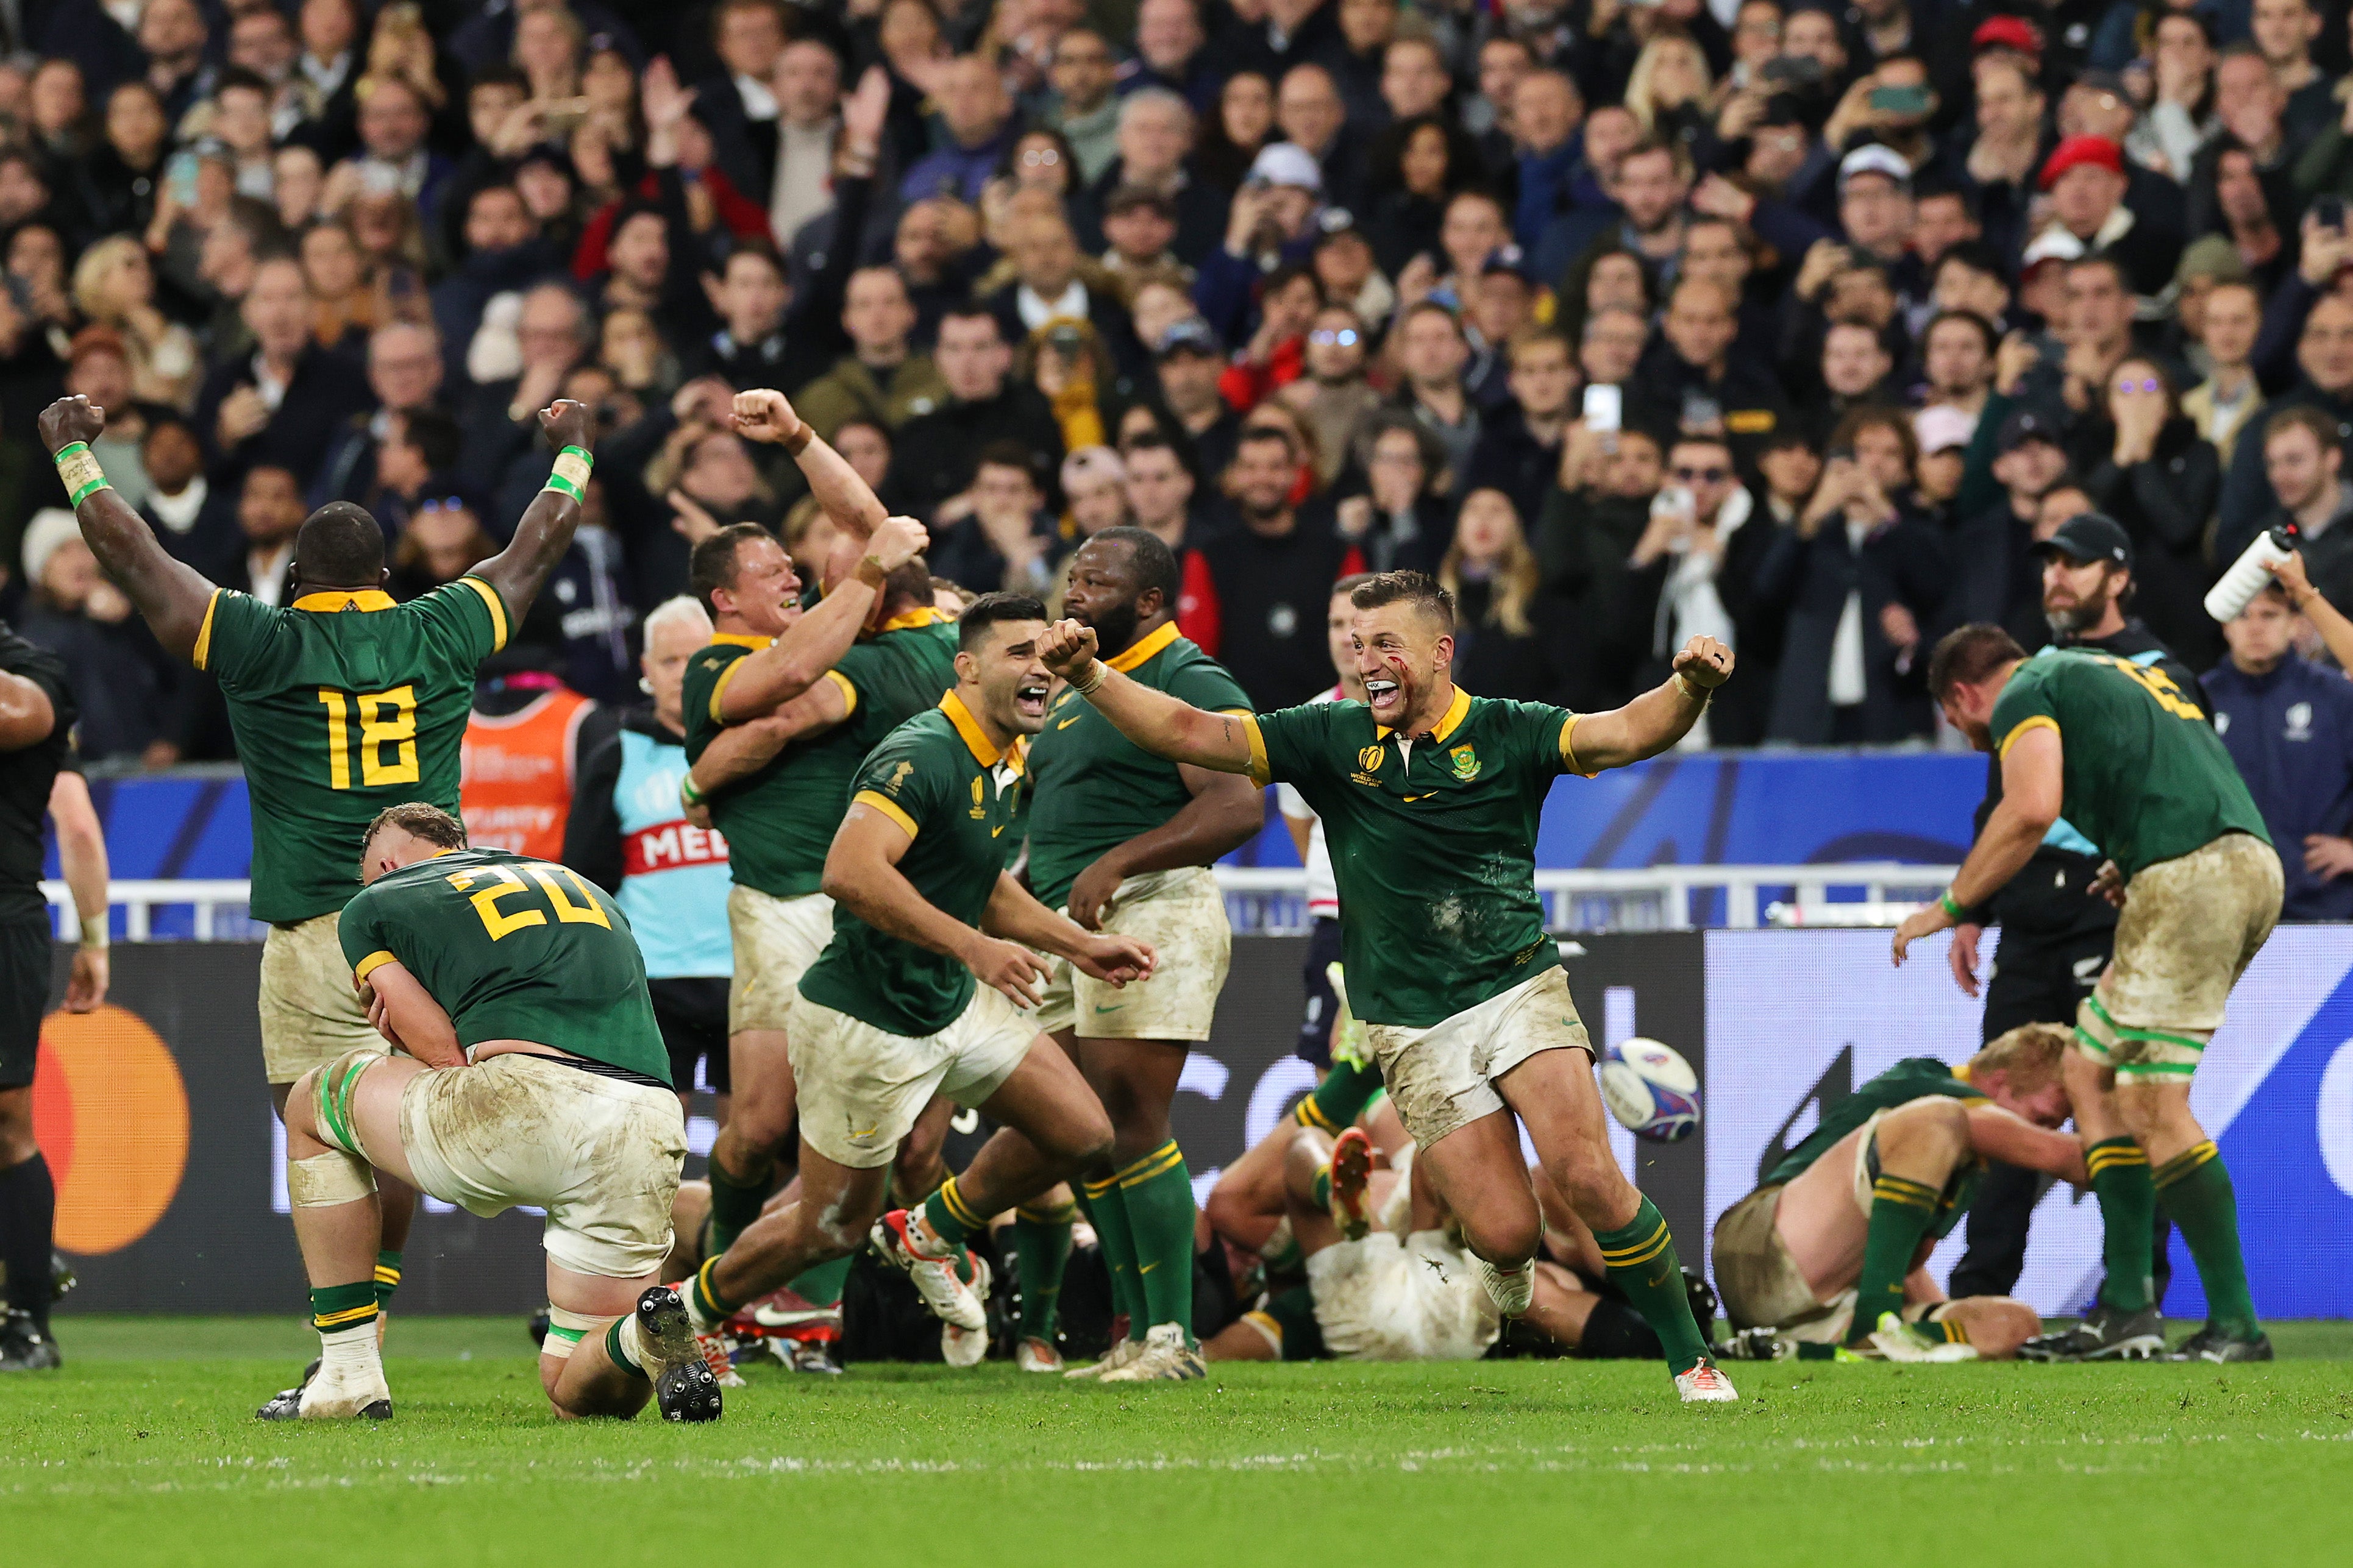 South African pipped New Zealand as they secured back-to-back World Cup crowns